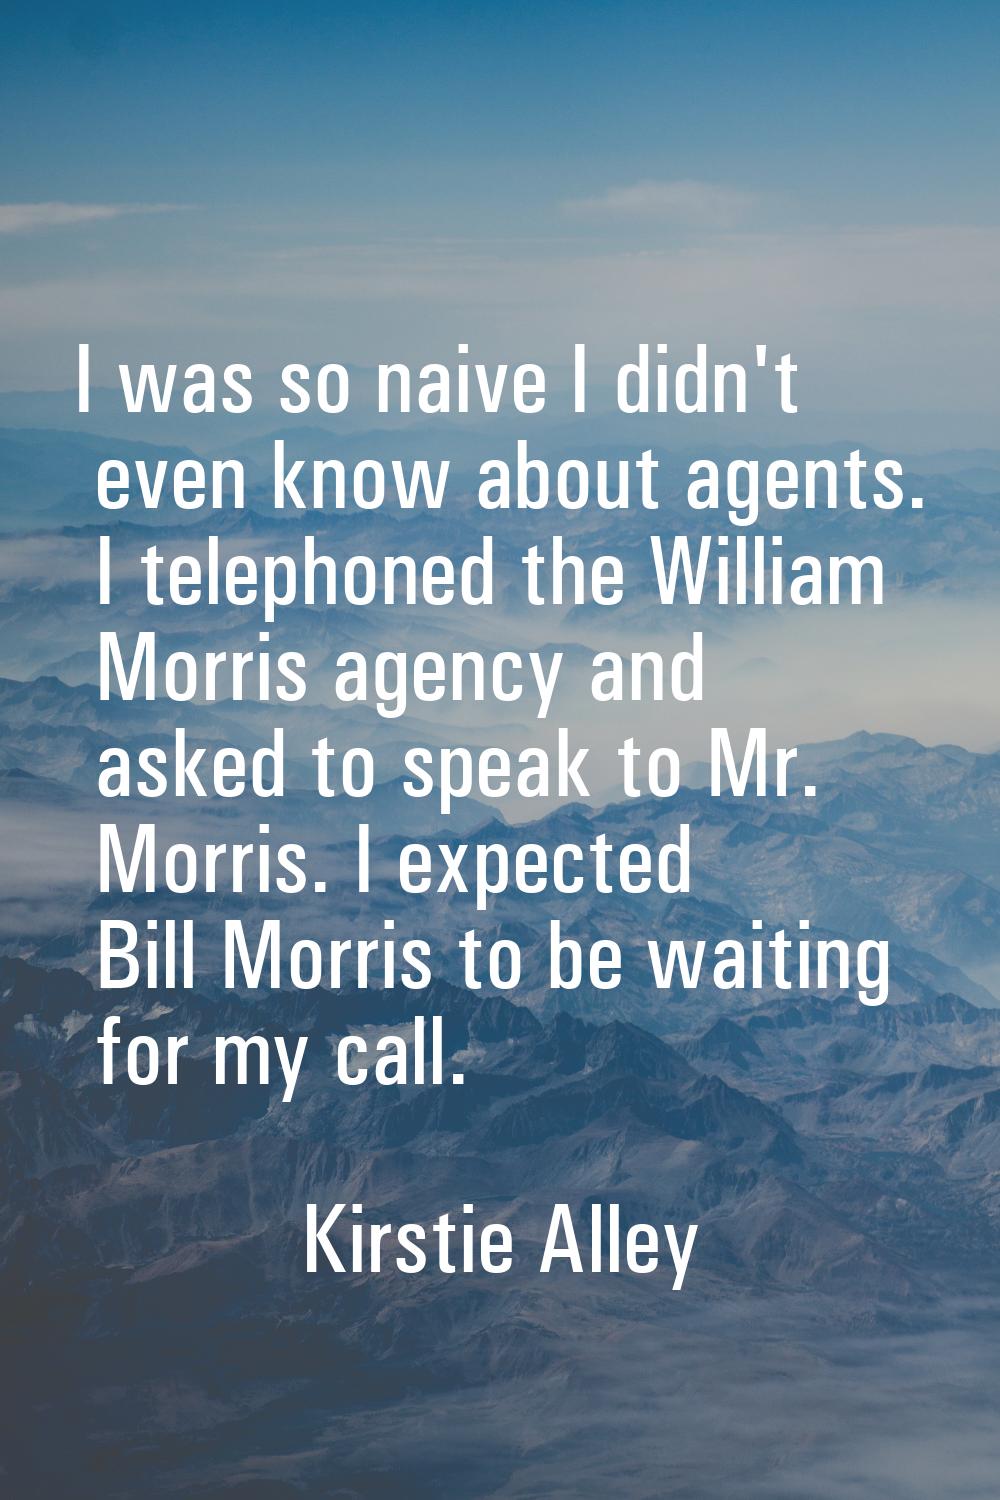 I was so naive I didn't even know about agents. I telephoned the William Morris agency and asked to